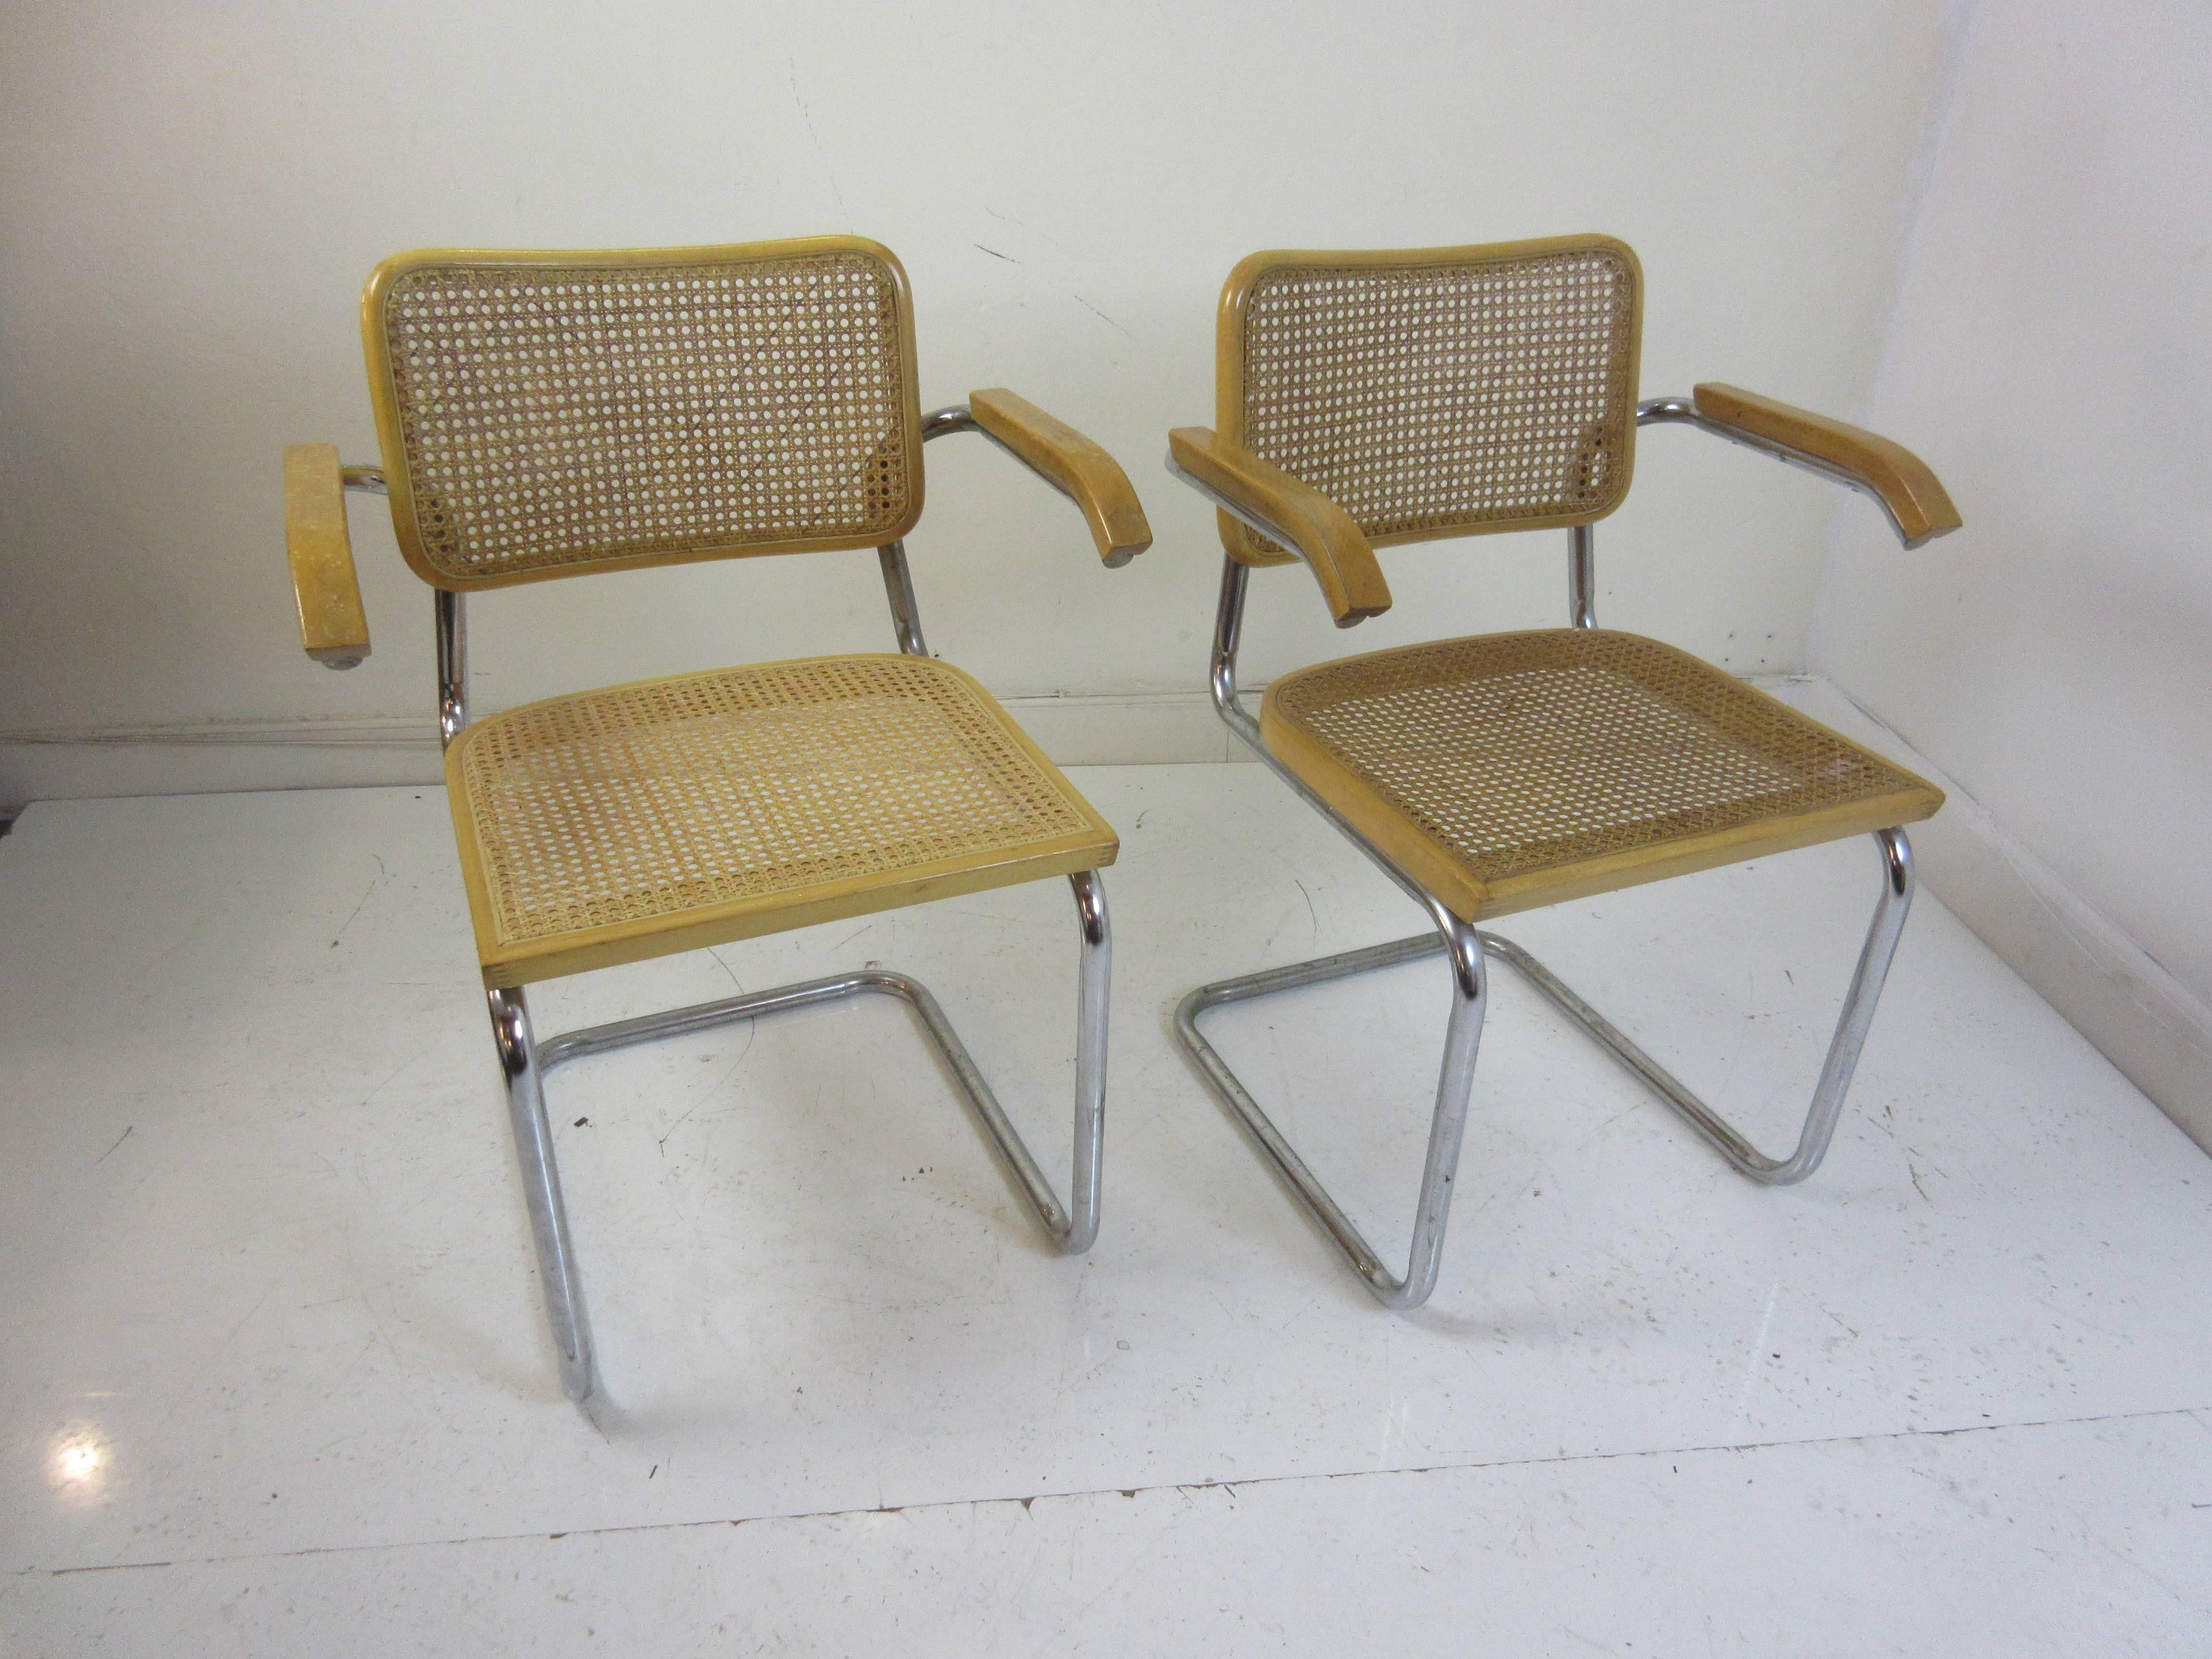 Marcel Breuer Cesca armchair by Gavina distributed by Knoll. These chairs are 1960s editions and are birch with chrome frames and canned seat and back rests. Chairs retain Made in Italy labels.